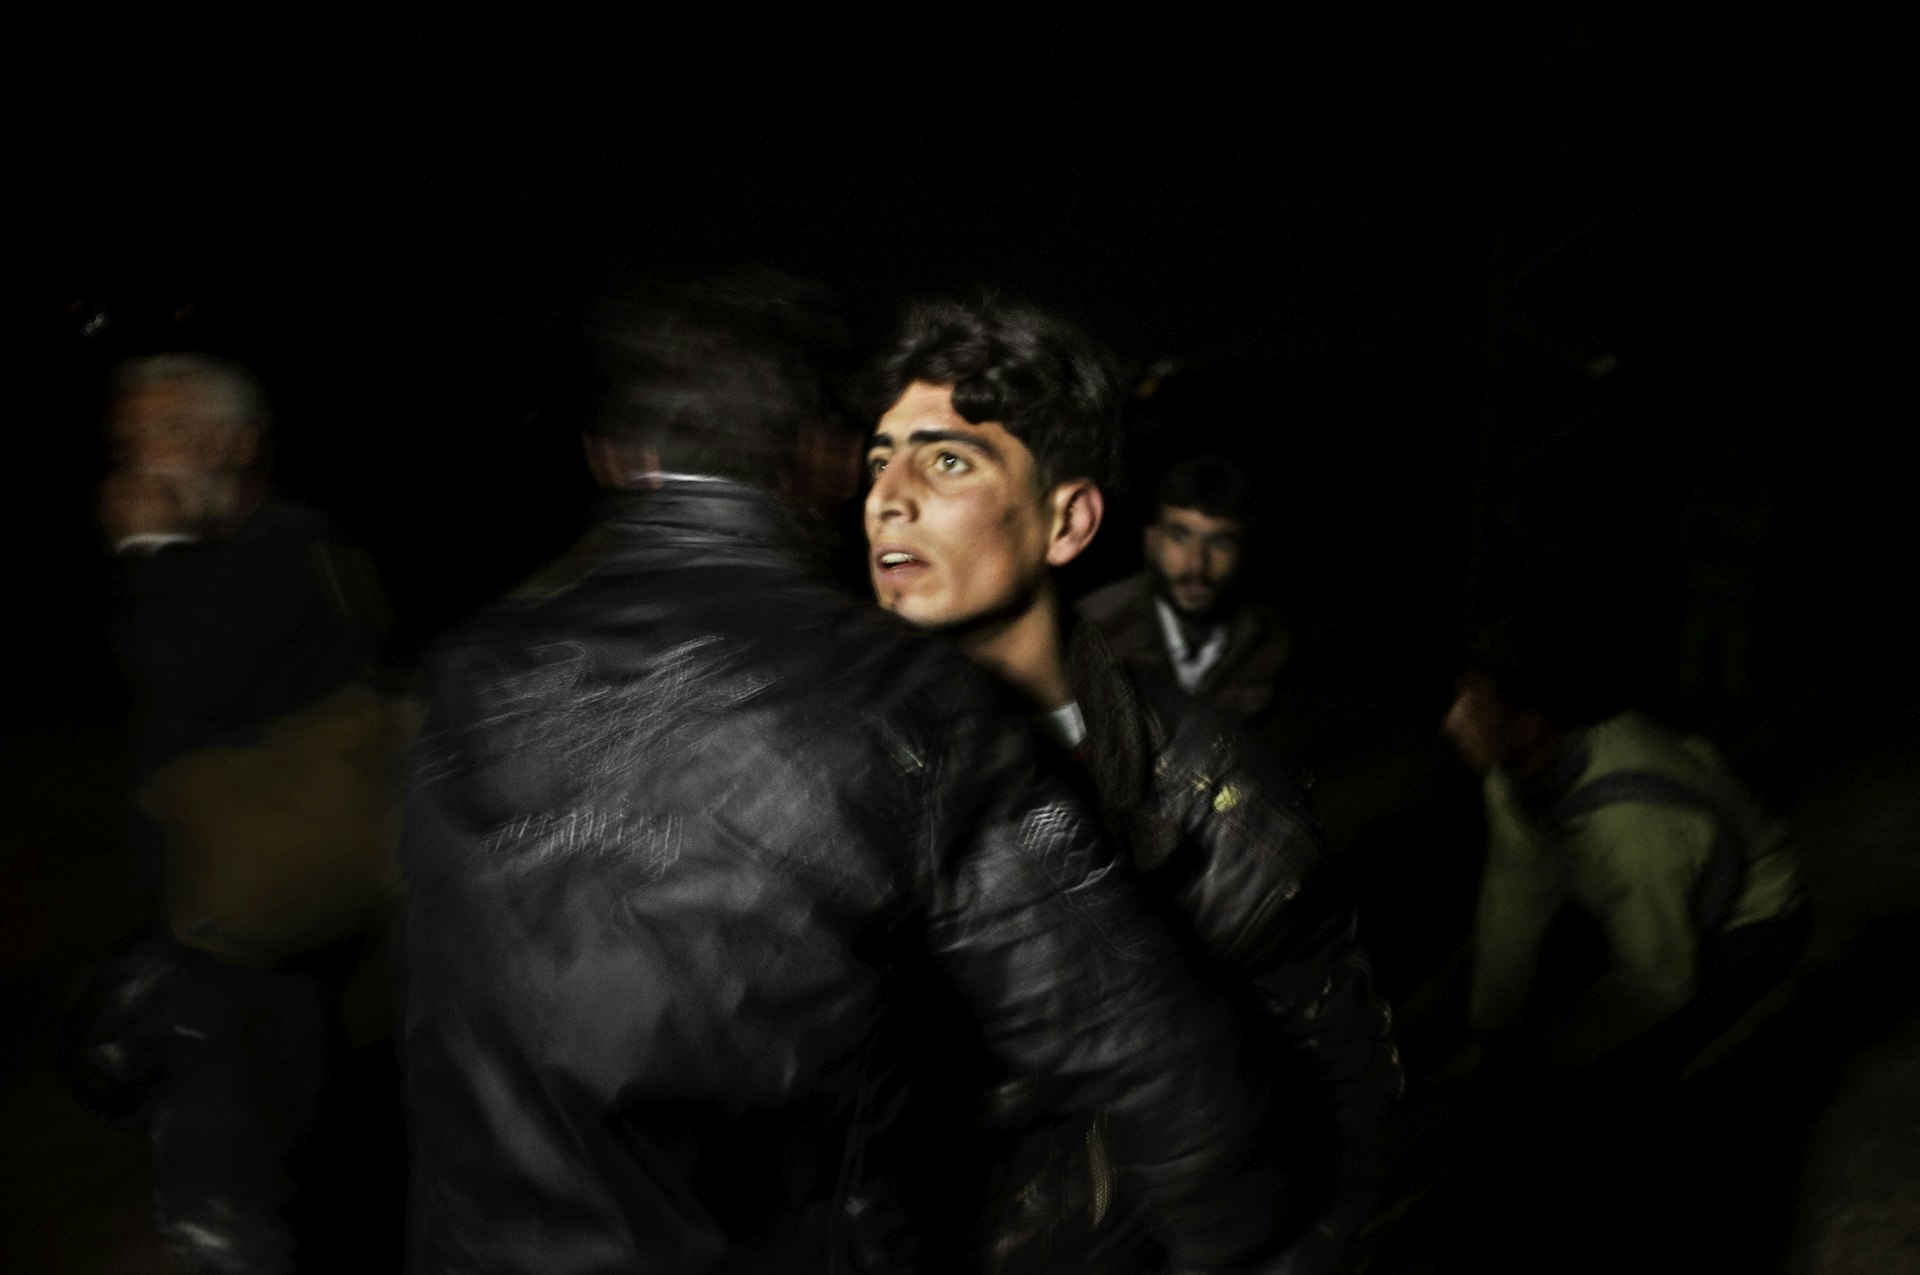 Along the Turkey-Syria border. March, 2012. Syrian refugees arrive inside Turkish territory under the cover of night after being smuggled from in from Syria. © Moises Saman / Magnum Photos 